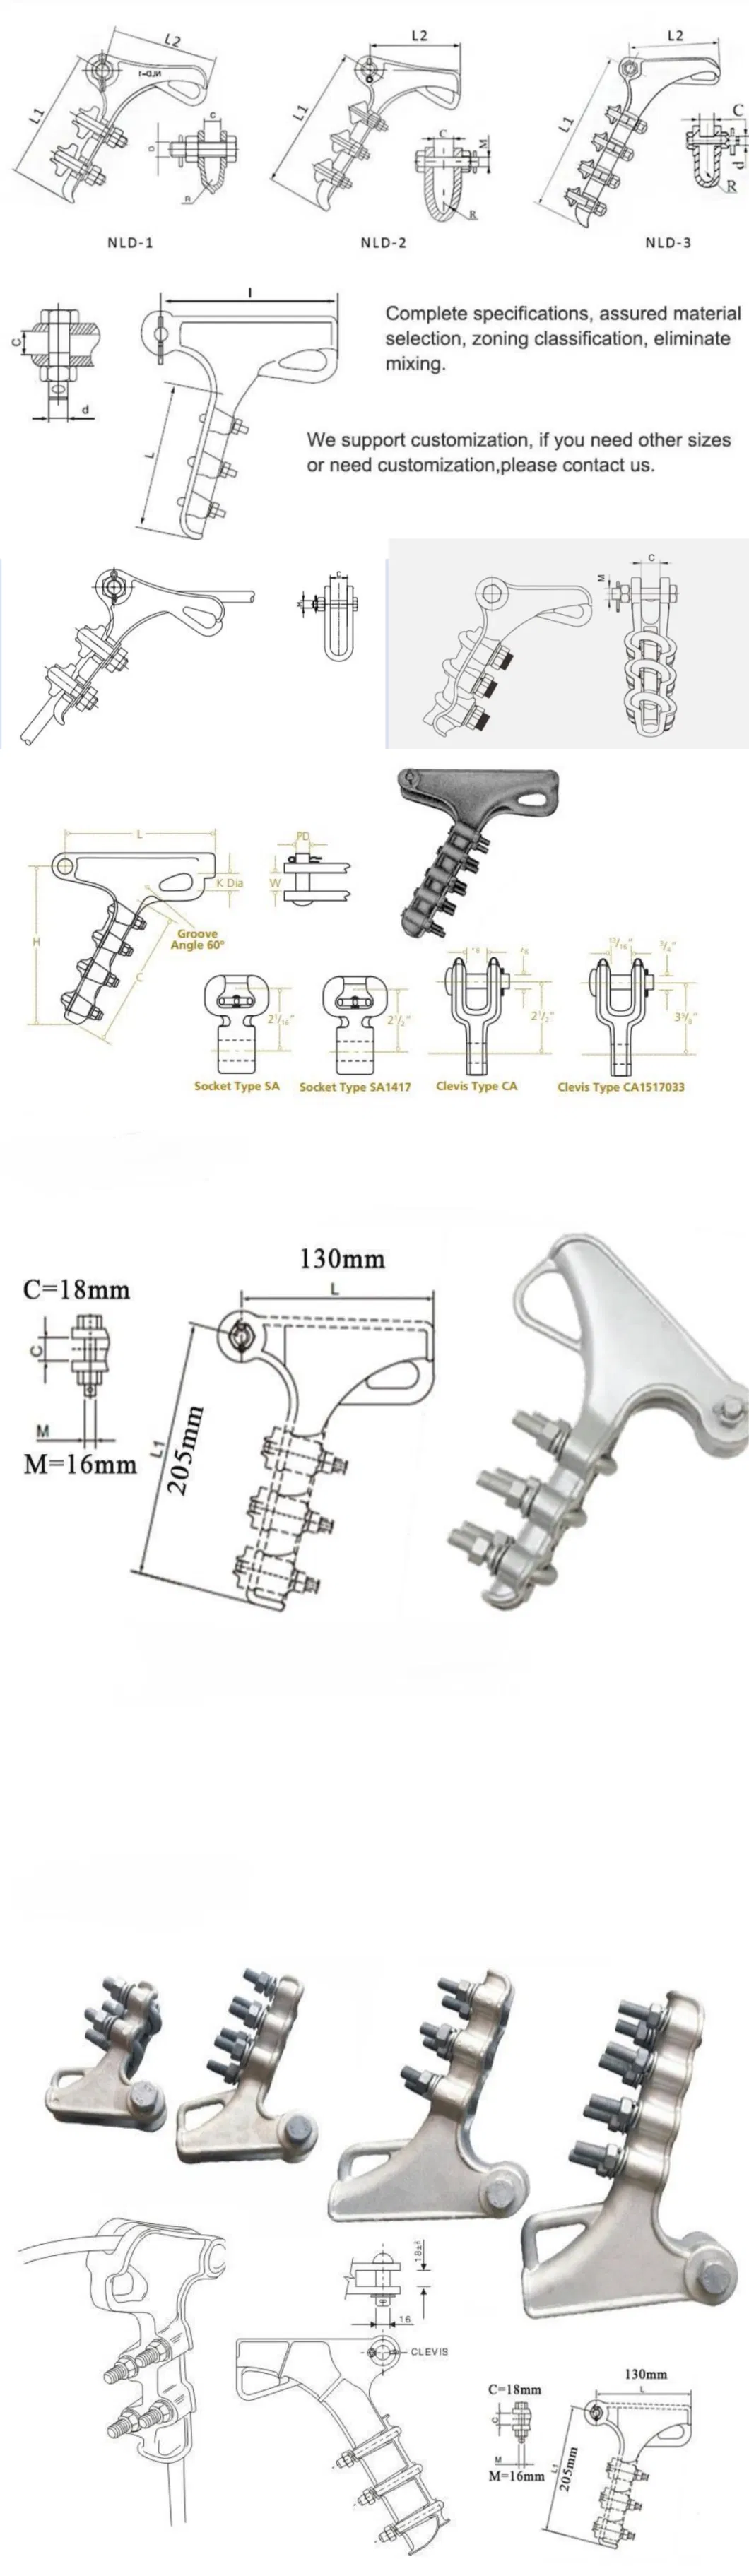 Nll Type Electric Power Fitting Cable Clips Tension Clamp of Tools &amp; Hardware